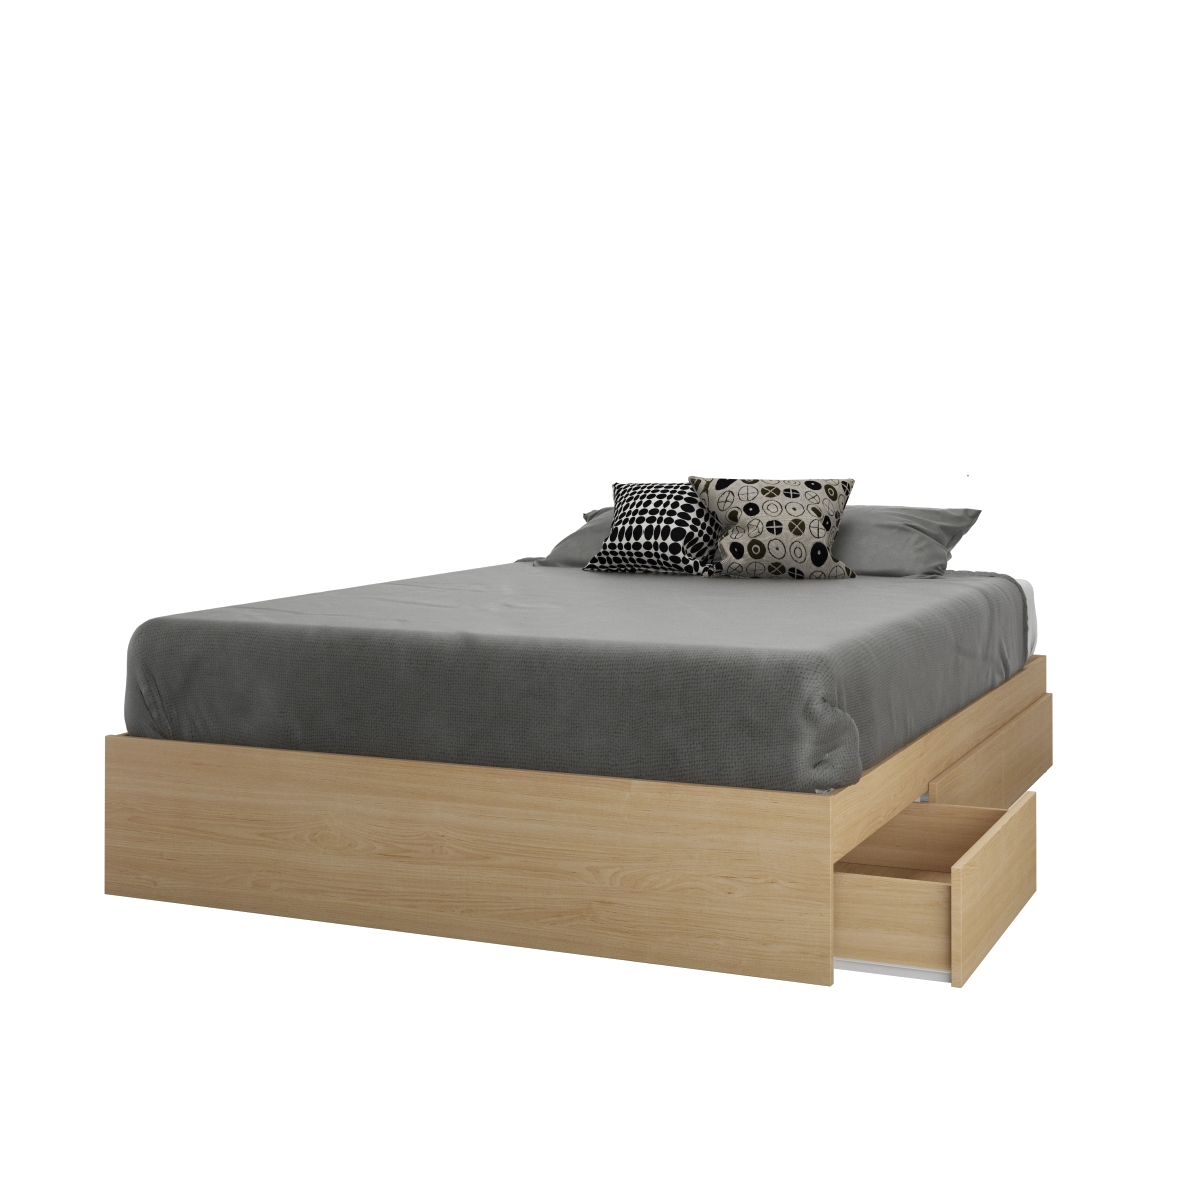 400946 Nomad Complete Bed Bundle With Vanity, Natural Maple Laminate - Full Size